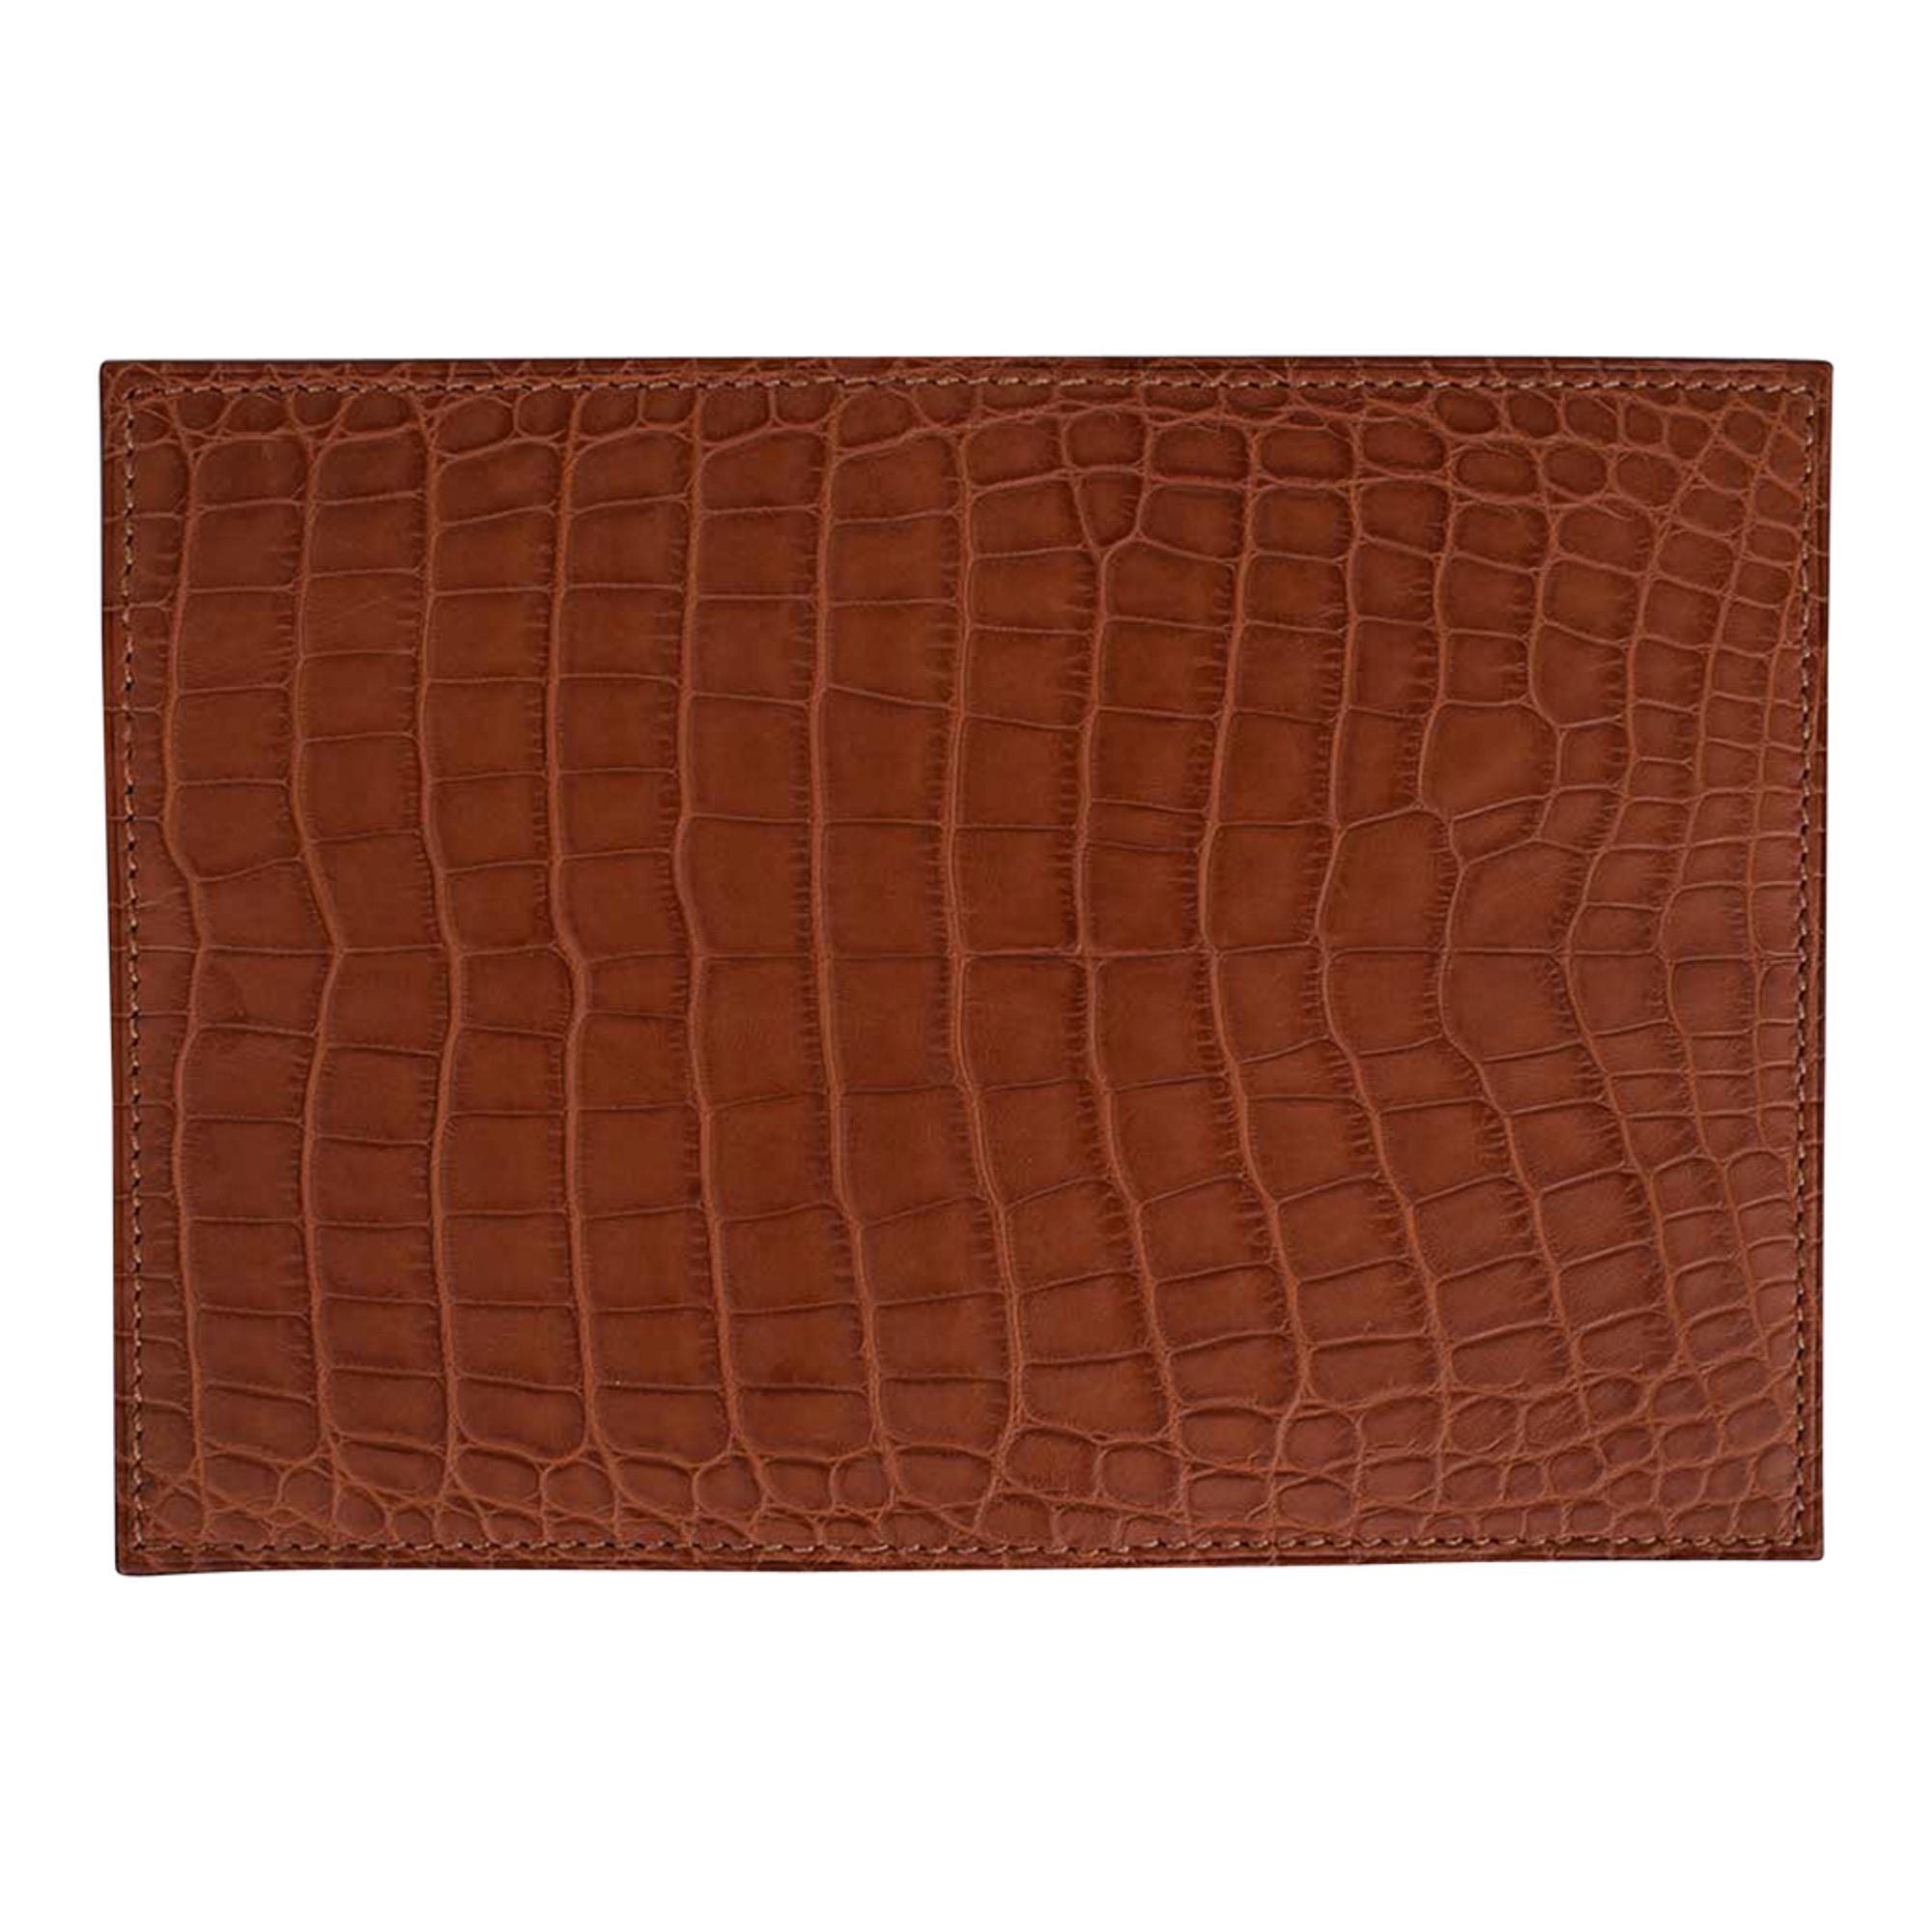 Mightychic offers a guaranteed authentic Hermes MC2 Euclid Card Case featured in Gold Matte Alligator.
The card holder has 4 slots for business/credit cards and 2 pockets.
Comes with signature Hermes box.
New or Store Fresh Condition.
final